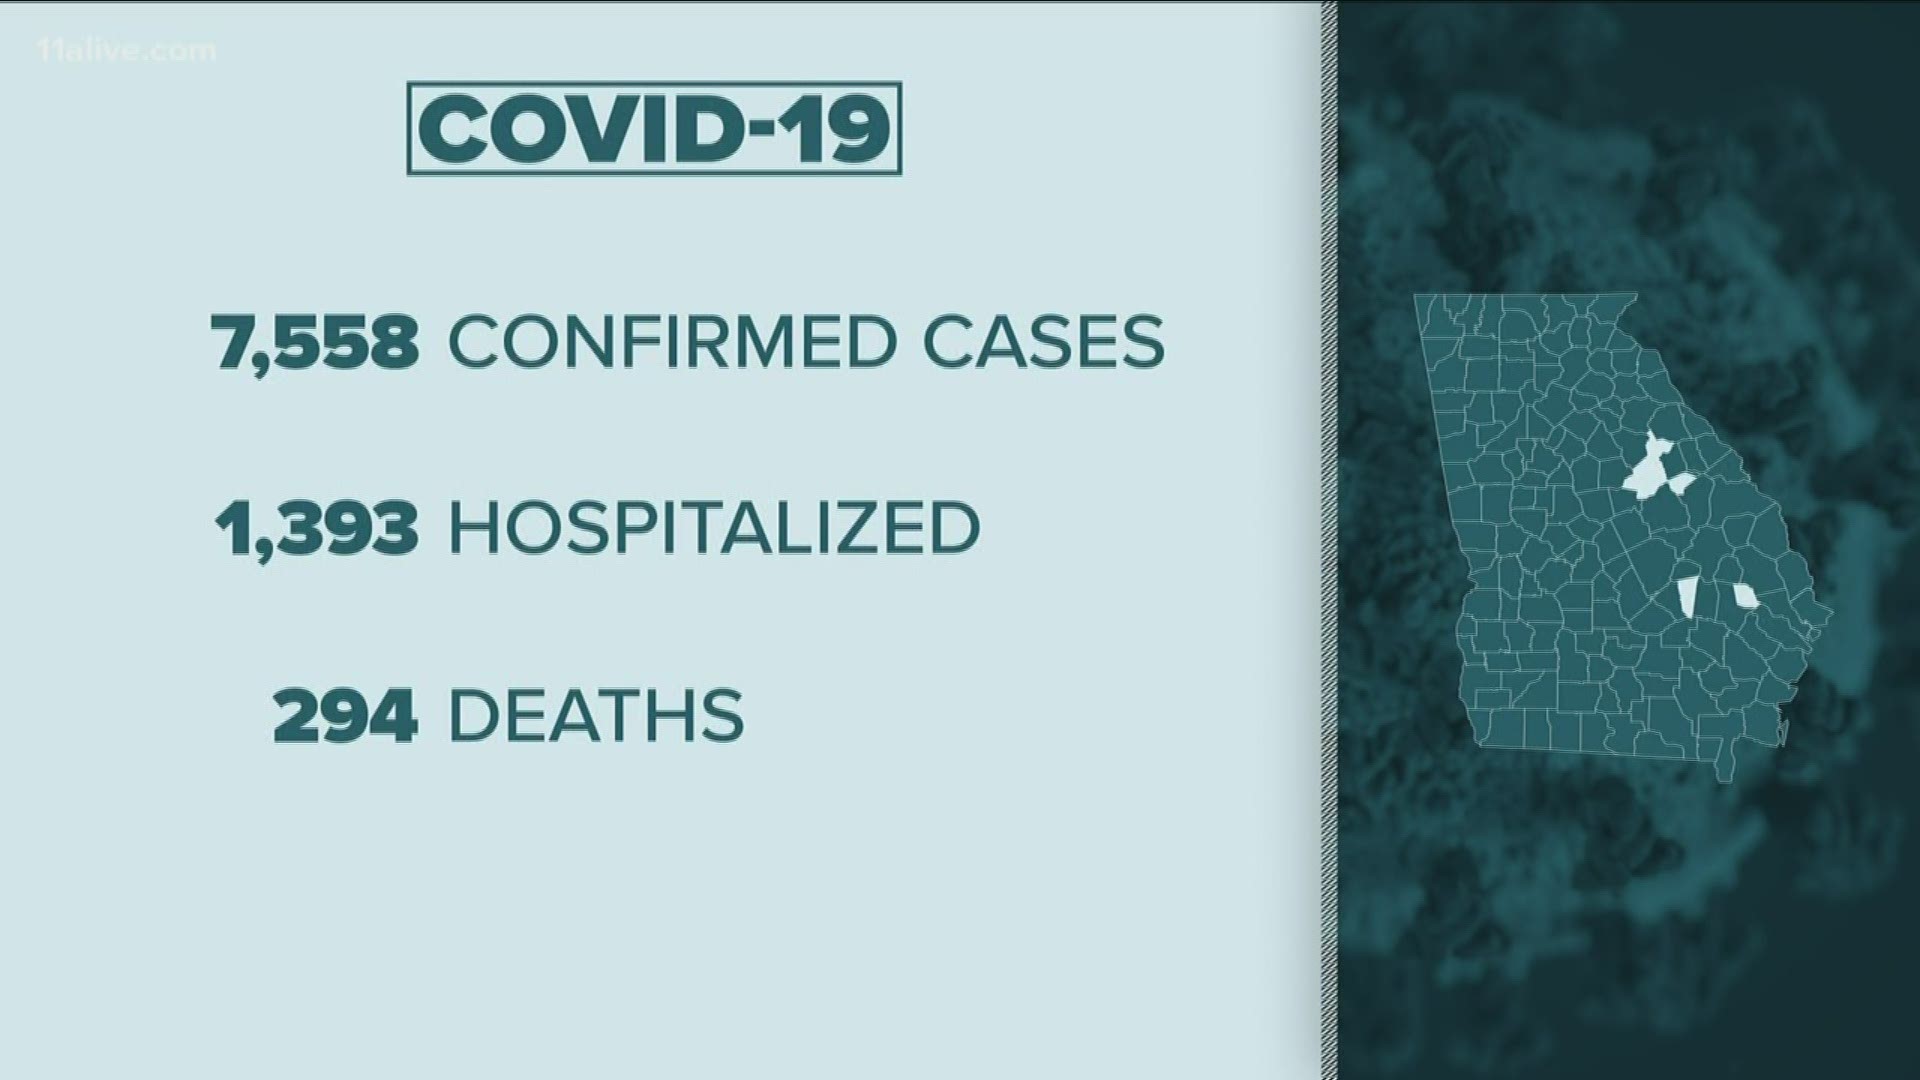 The latest numbers released on April 6 at 7 p.m. suggest 7,558 confirmed cases in the state with 1,393 of them hospitalized. There have also been 294 deaths.